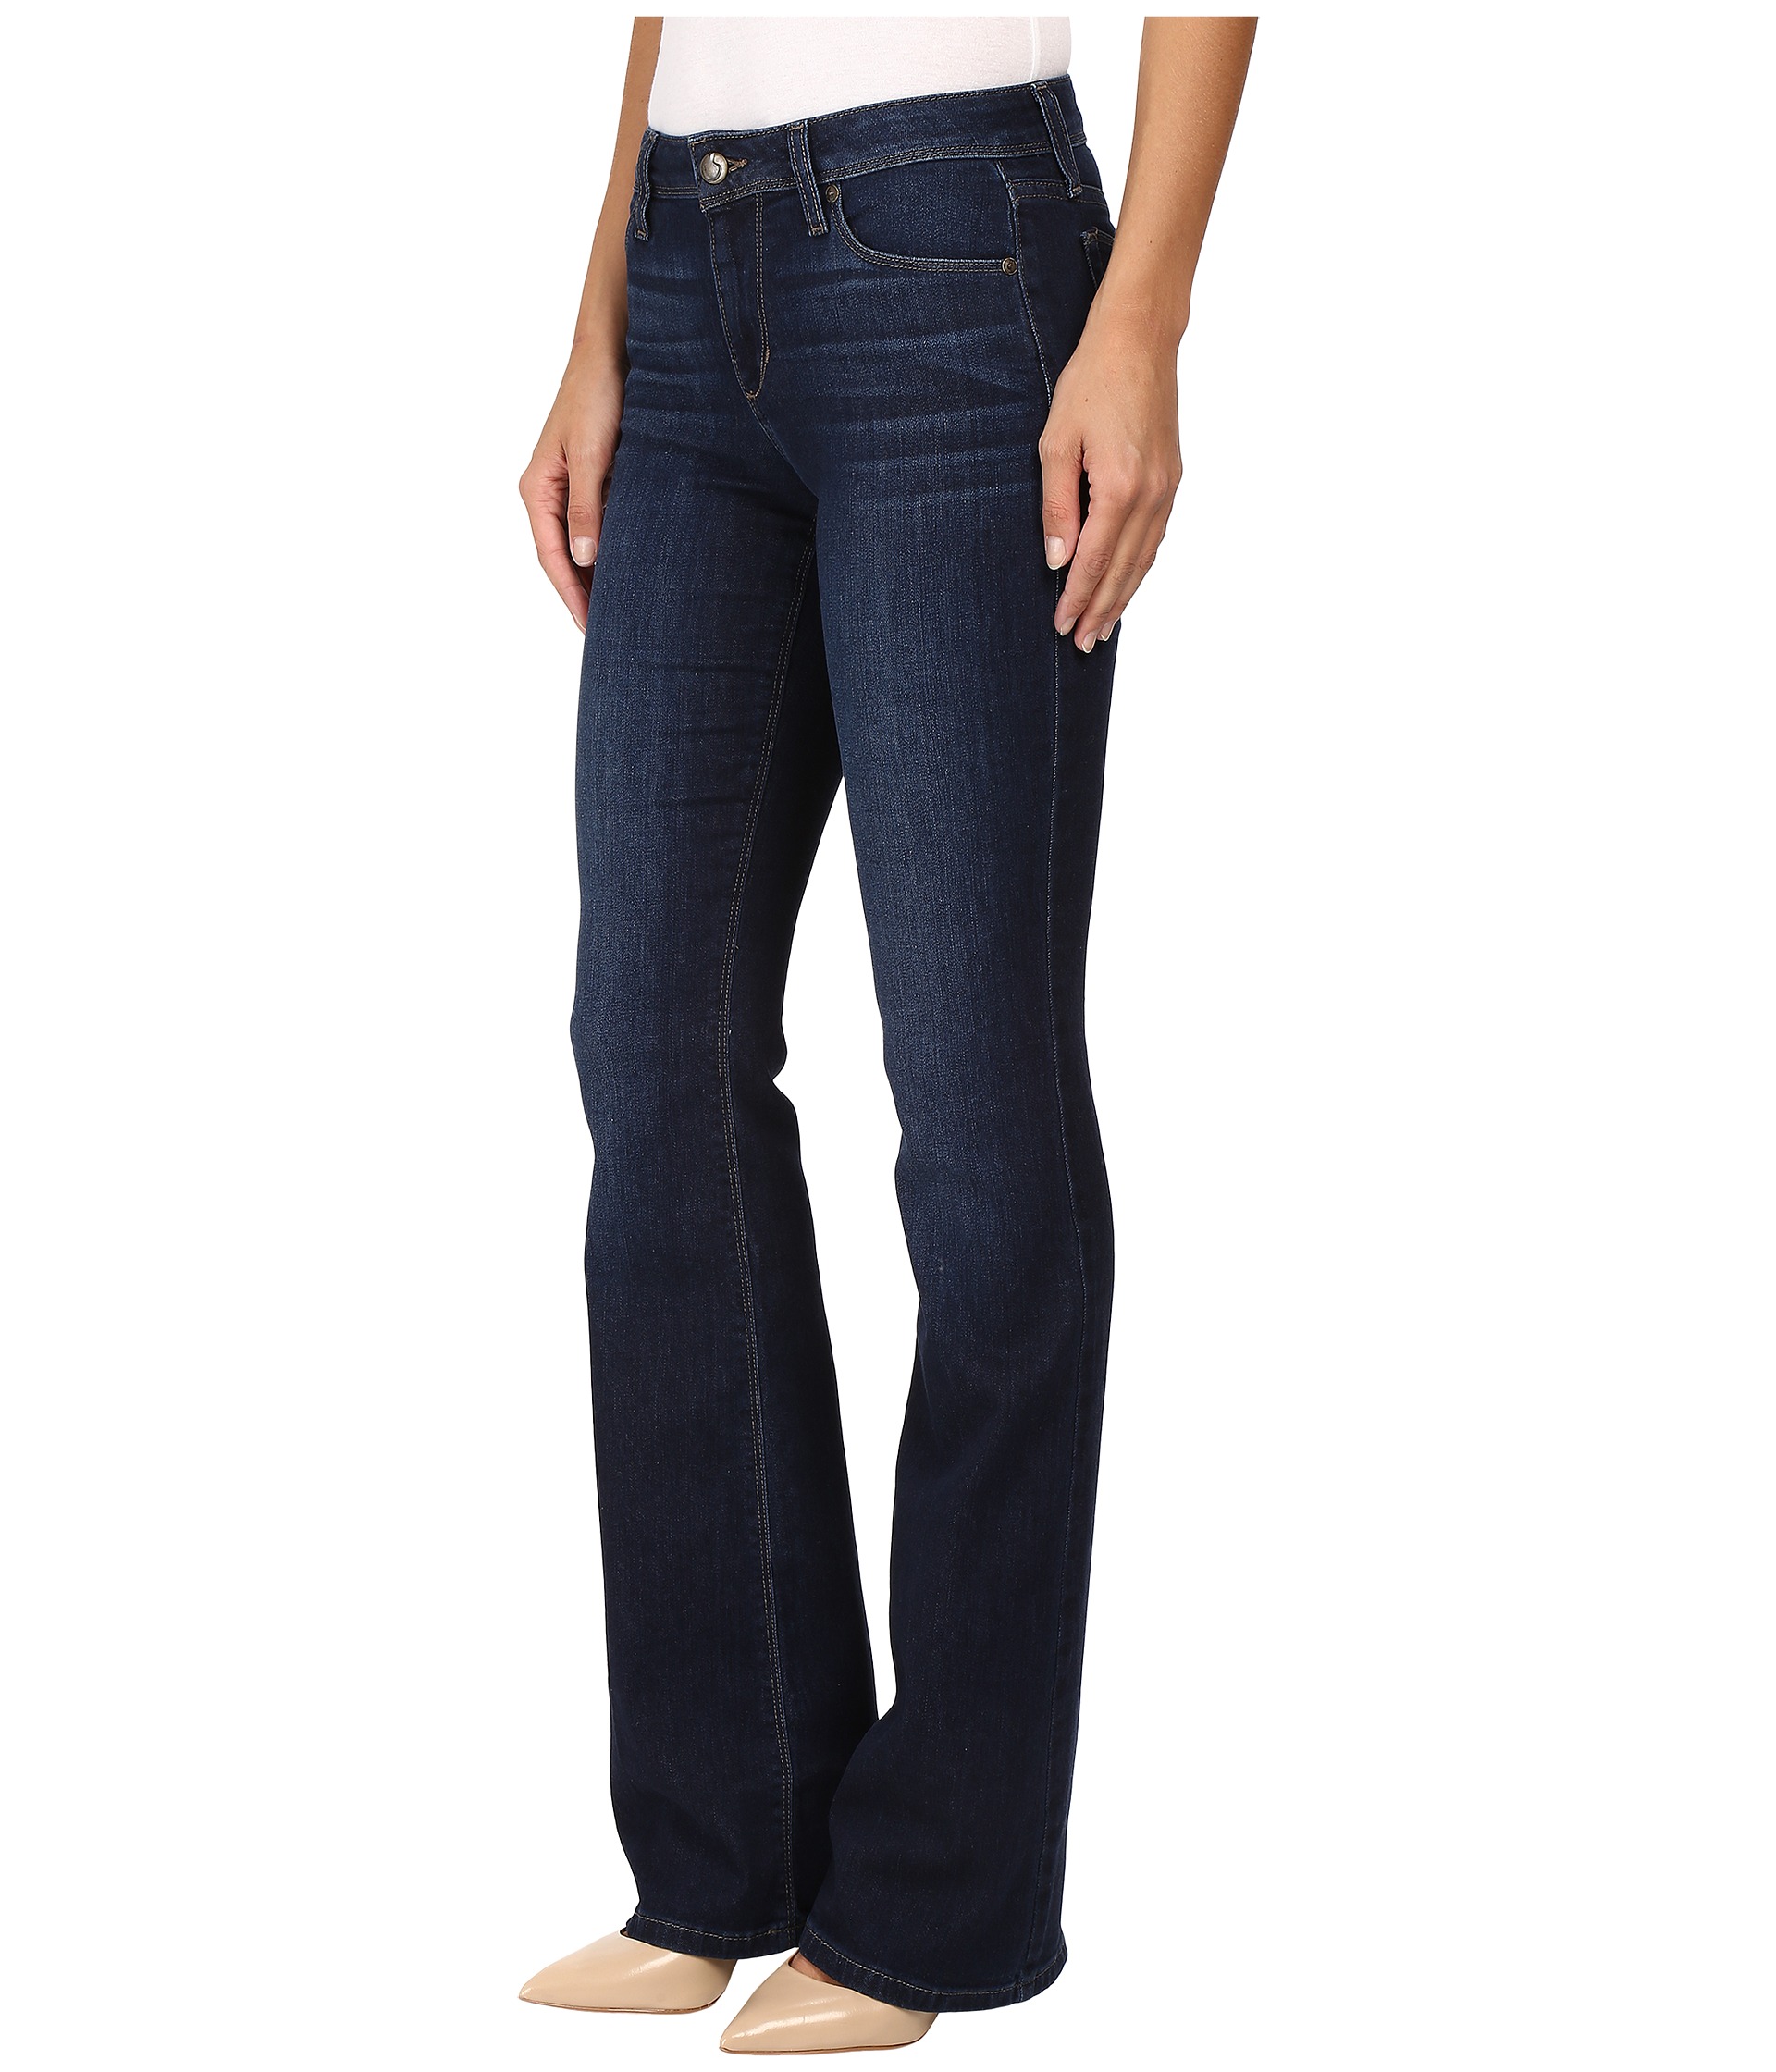 Joe's Jeans Honey Bootcut in Saunders at Zappos.com